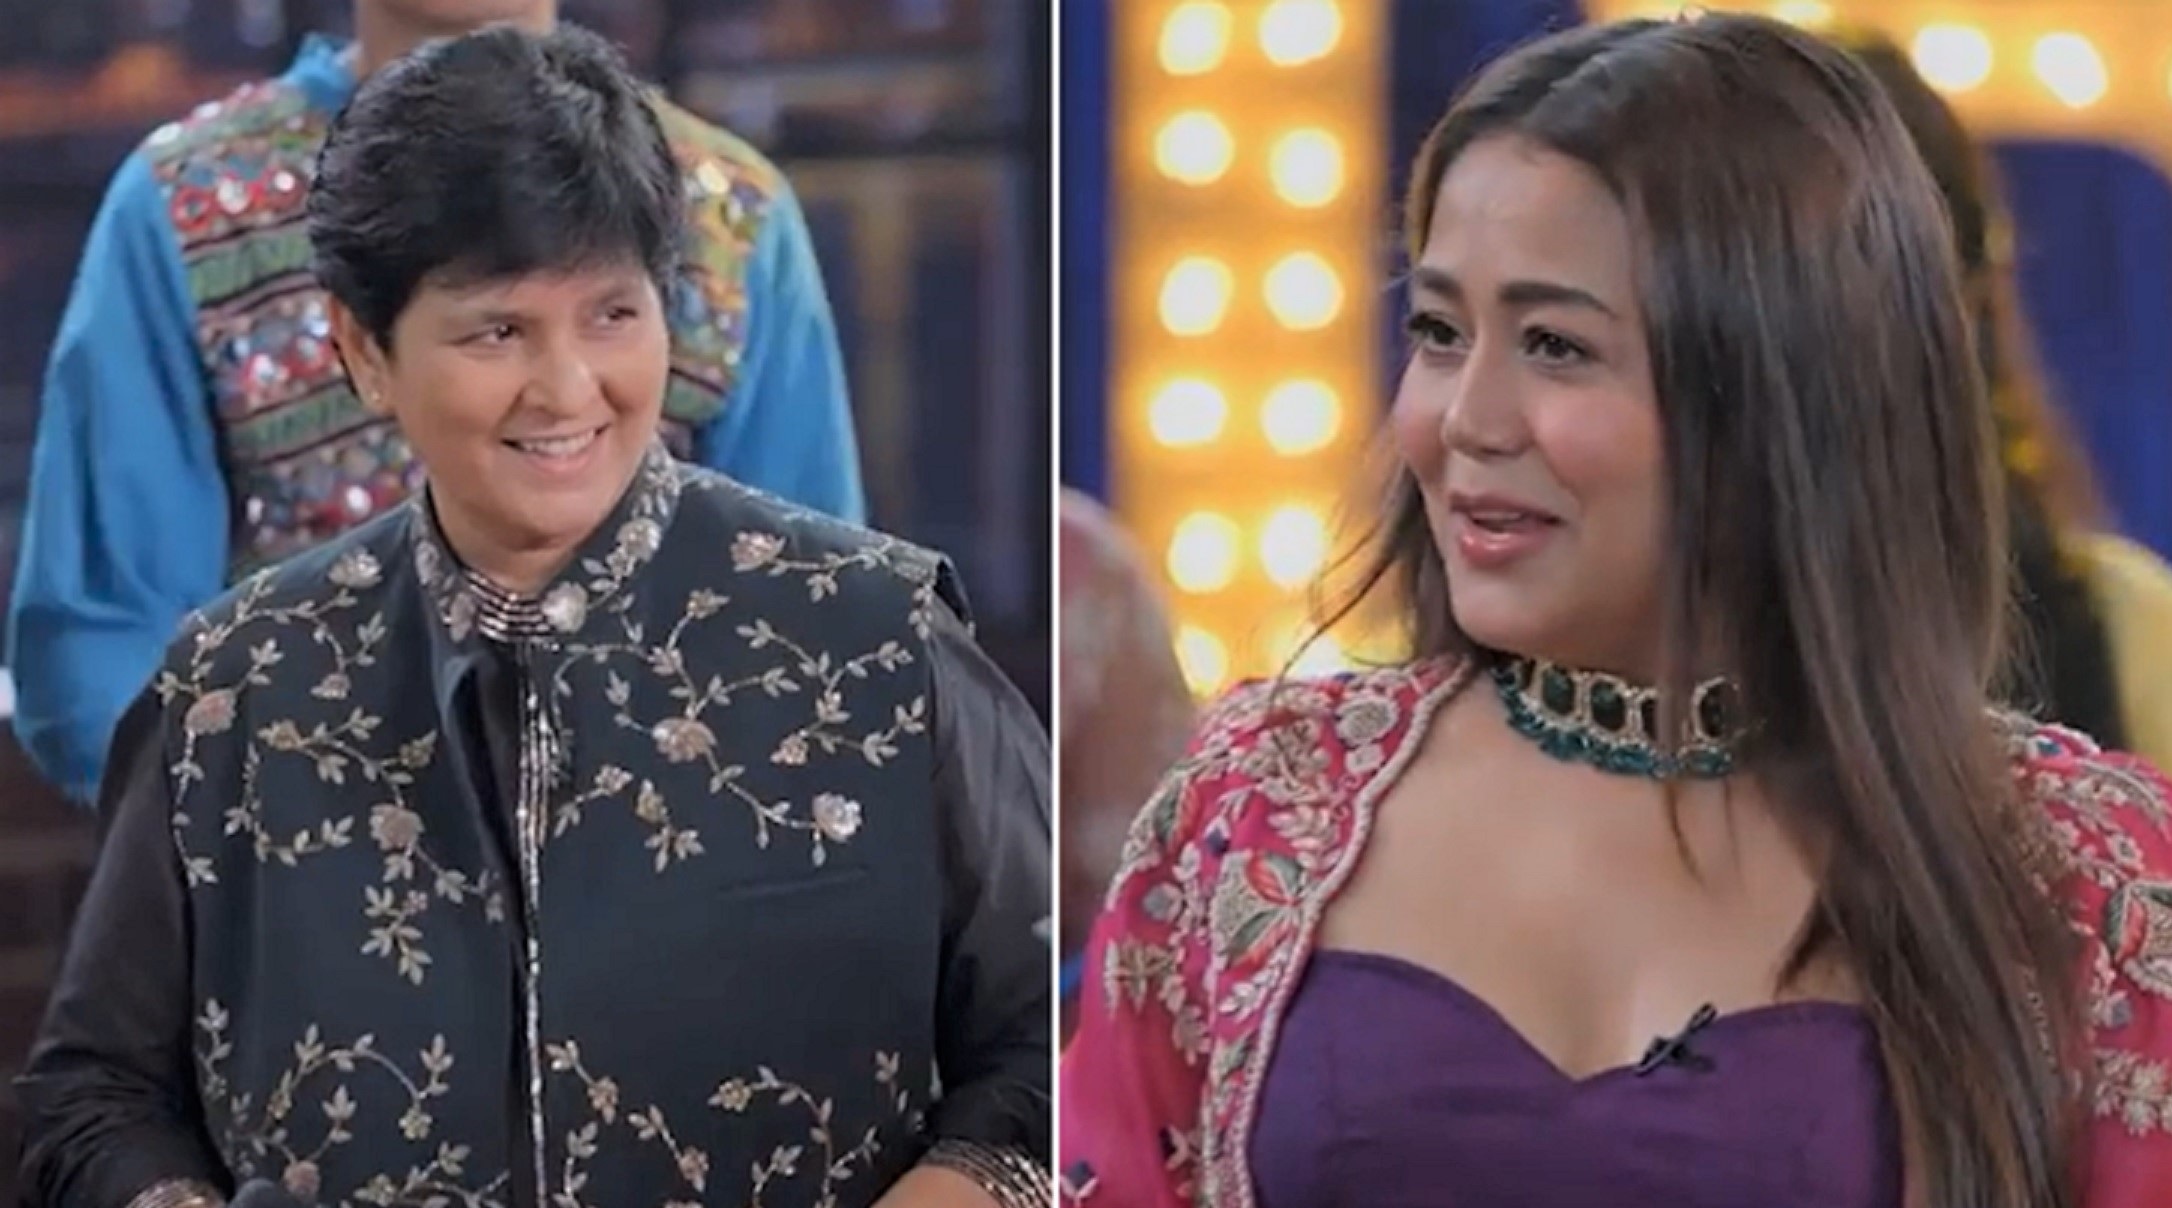 After Wishing To Sue Over Remix, Falguni Pathak Joins Neha Kakkar On Indian Idol For A Performance